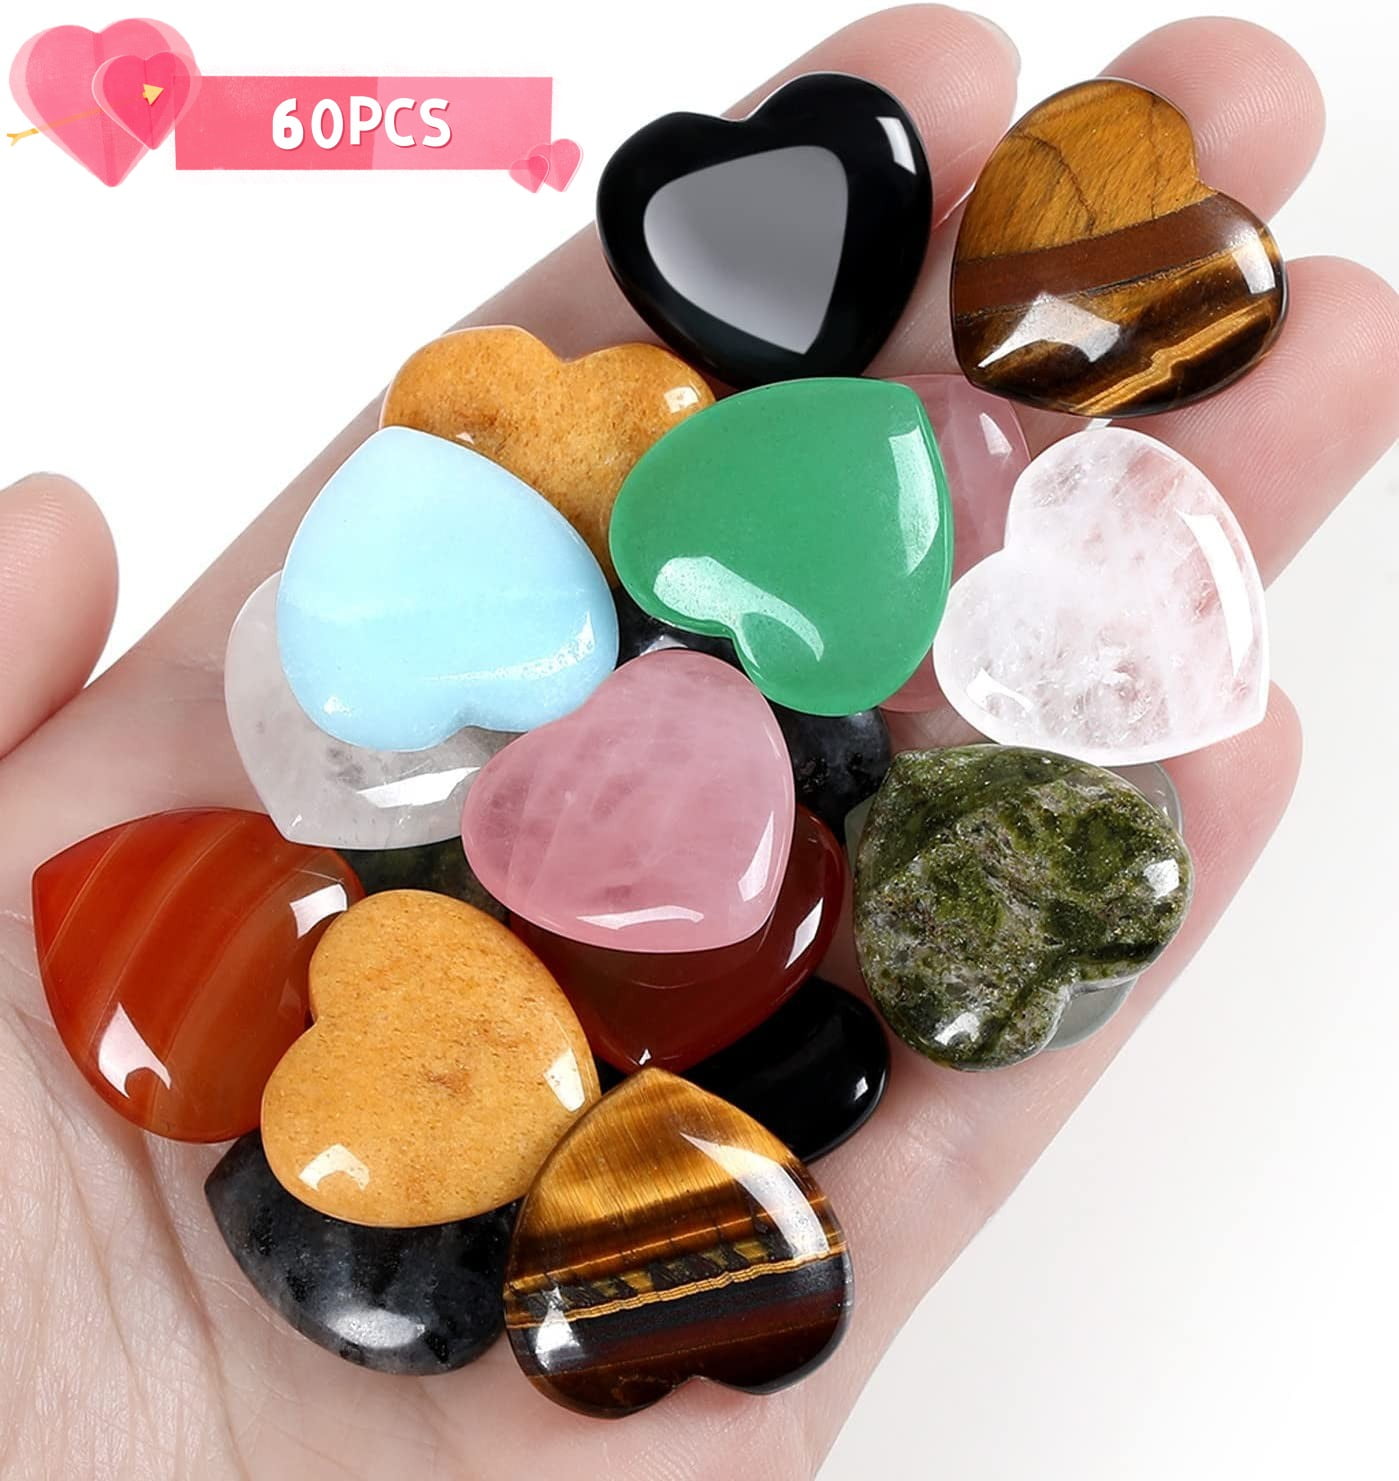 Patelai 72 Pcs Heart Worry Stones Crystal Bulk Heart Love Crystal Pocket  Polished Heart Stones 0.5 Inch Gemstone Heart Rocks for Valentines Day  Gifts